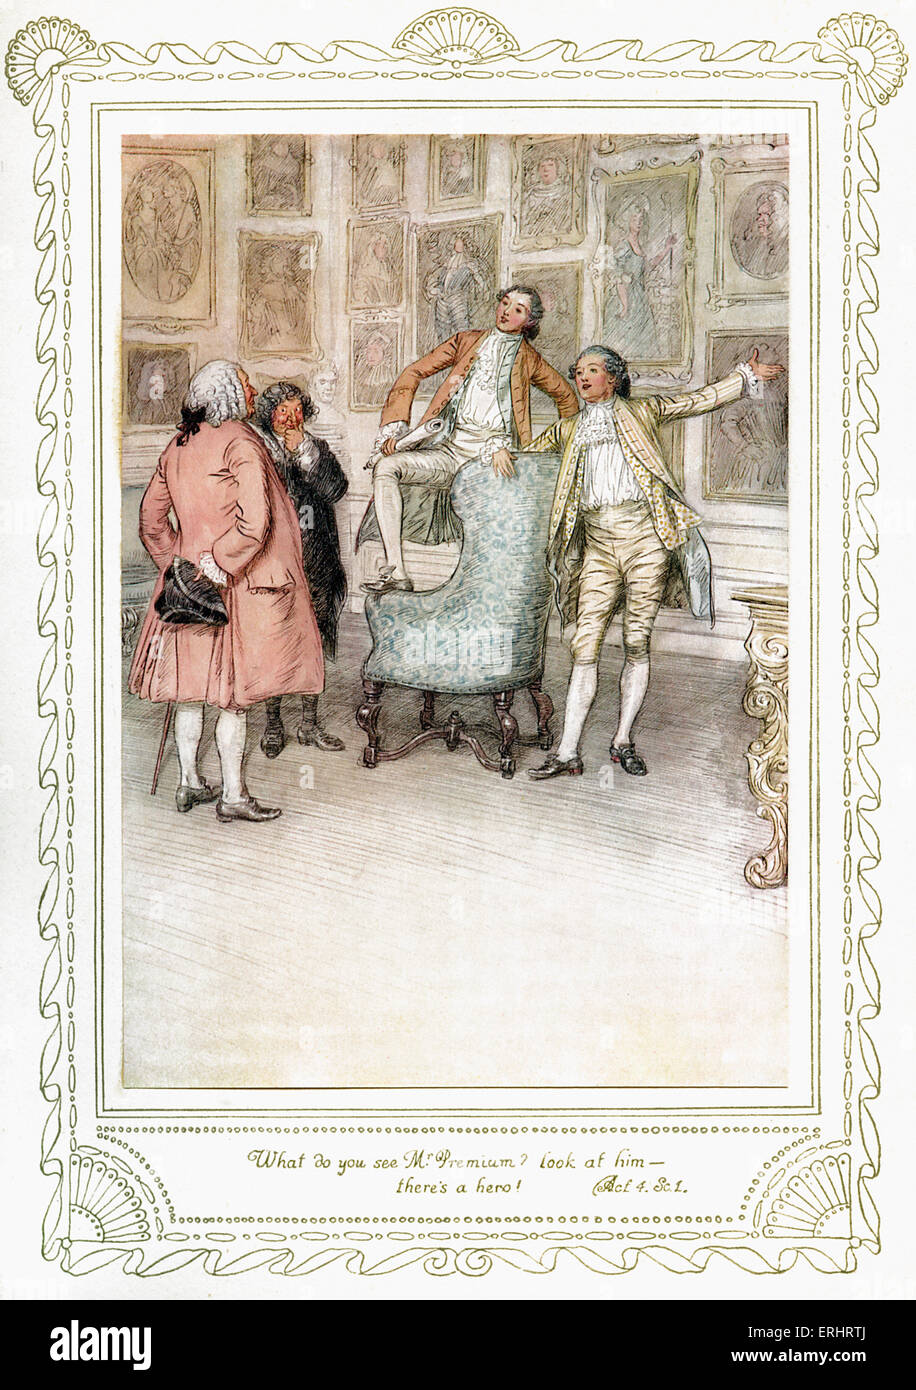 Richard Brinsley Sheridan's play - 'The School for Scandal'. Act 4, Scene 1 - 'What do you see Mr. Premium? Look at him - Stock Photo